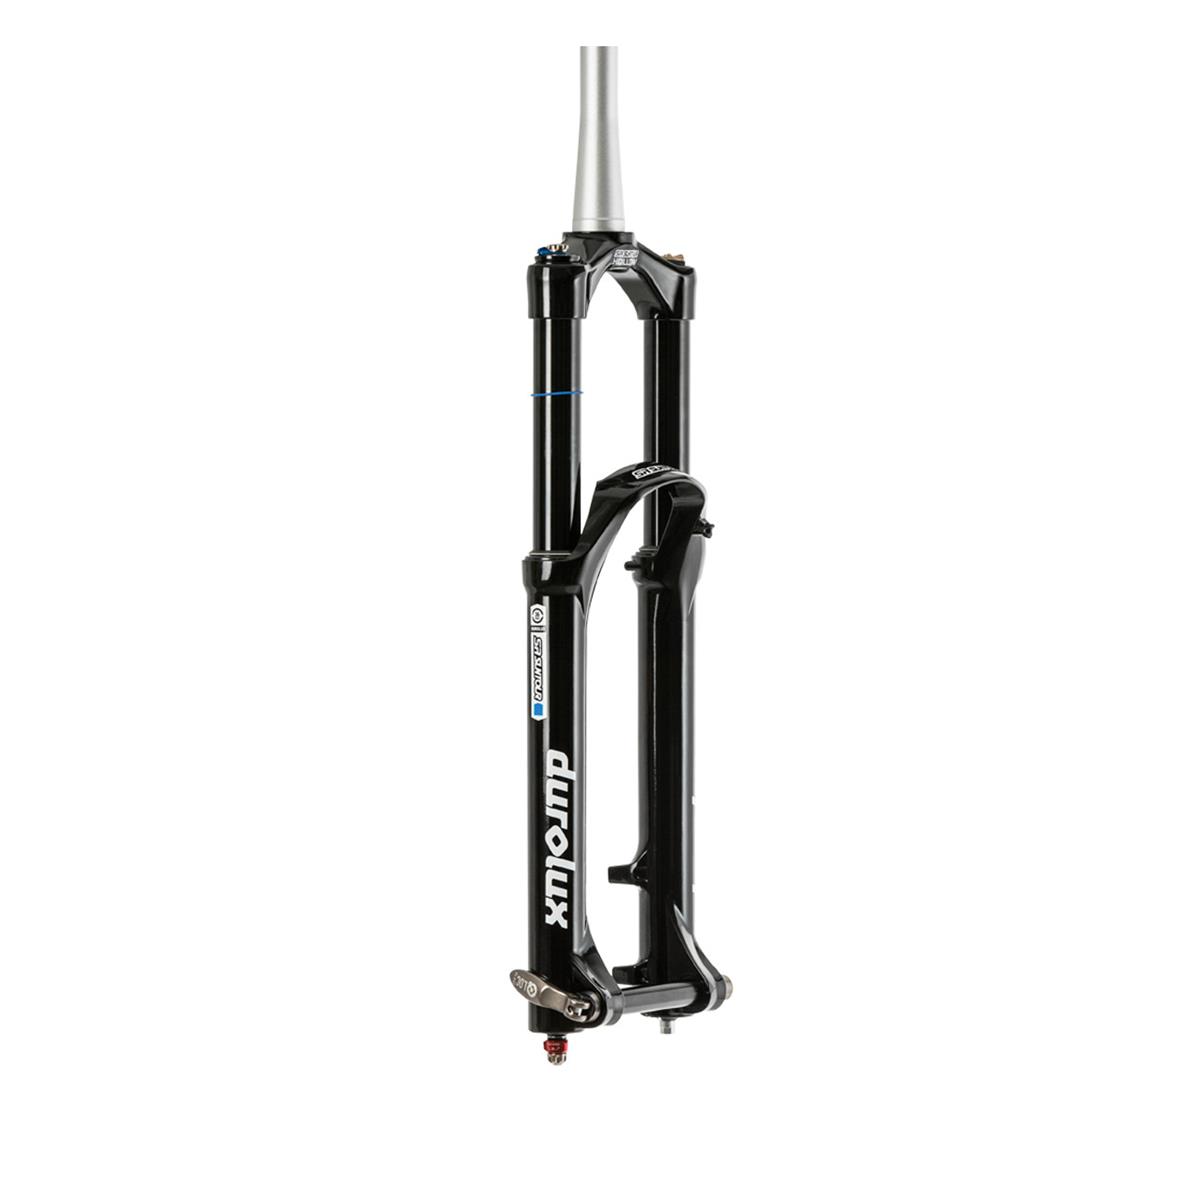 Suntour Forcella DUROLUX R2C2 27.5 Pollici, Air Spring, 20 mm QLC-Axle , tapered, Nero Opaco